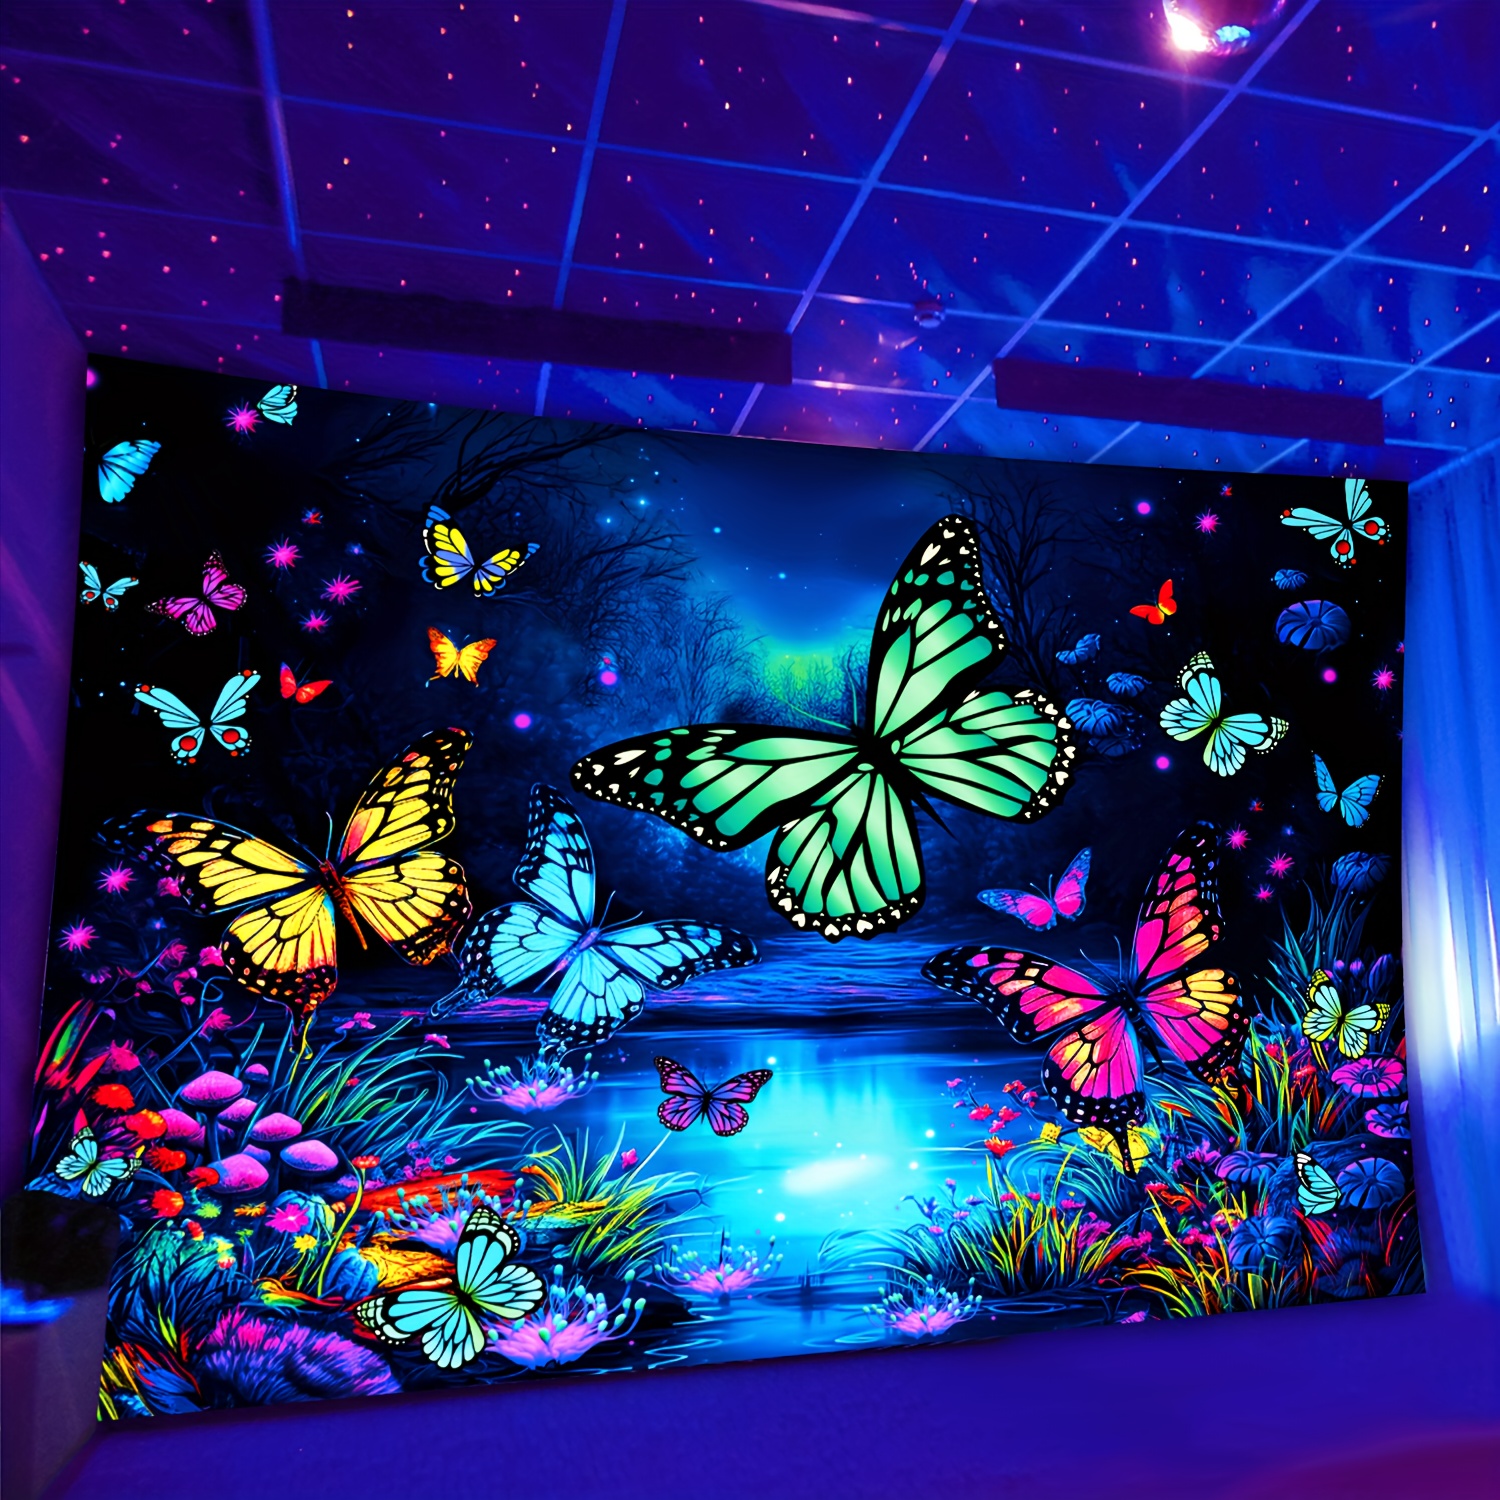 

Glowing Butterfly Pond Tapestry, Large Size Fluorescent Wall Hanging, Animal Print Pattern, Woven Polyester Home Decor For Dining Room, Indoor Use, No Electricity Required